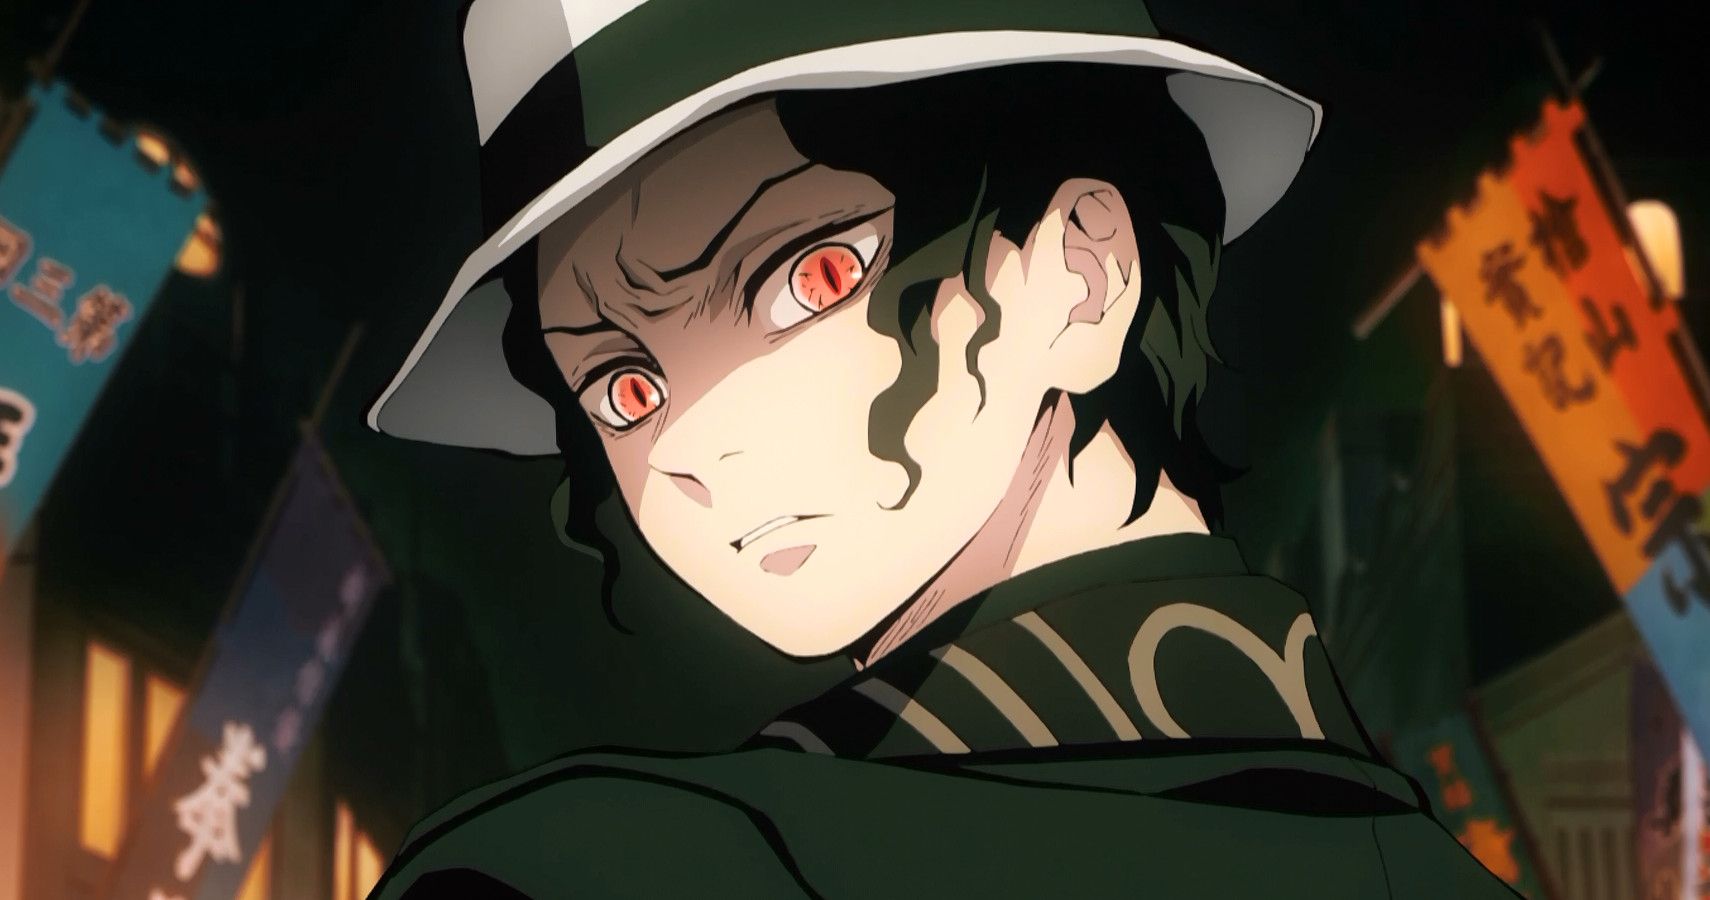 The 10 Best Anime Villains Of 2019 Ranked By How Horrible They Are